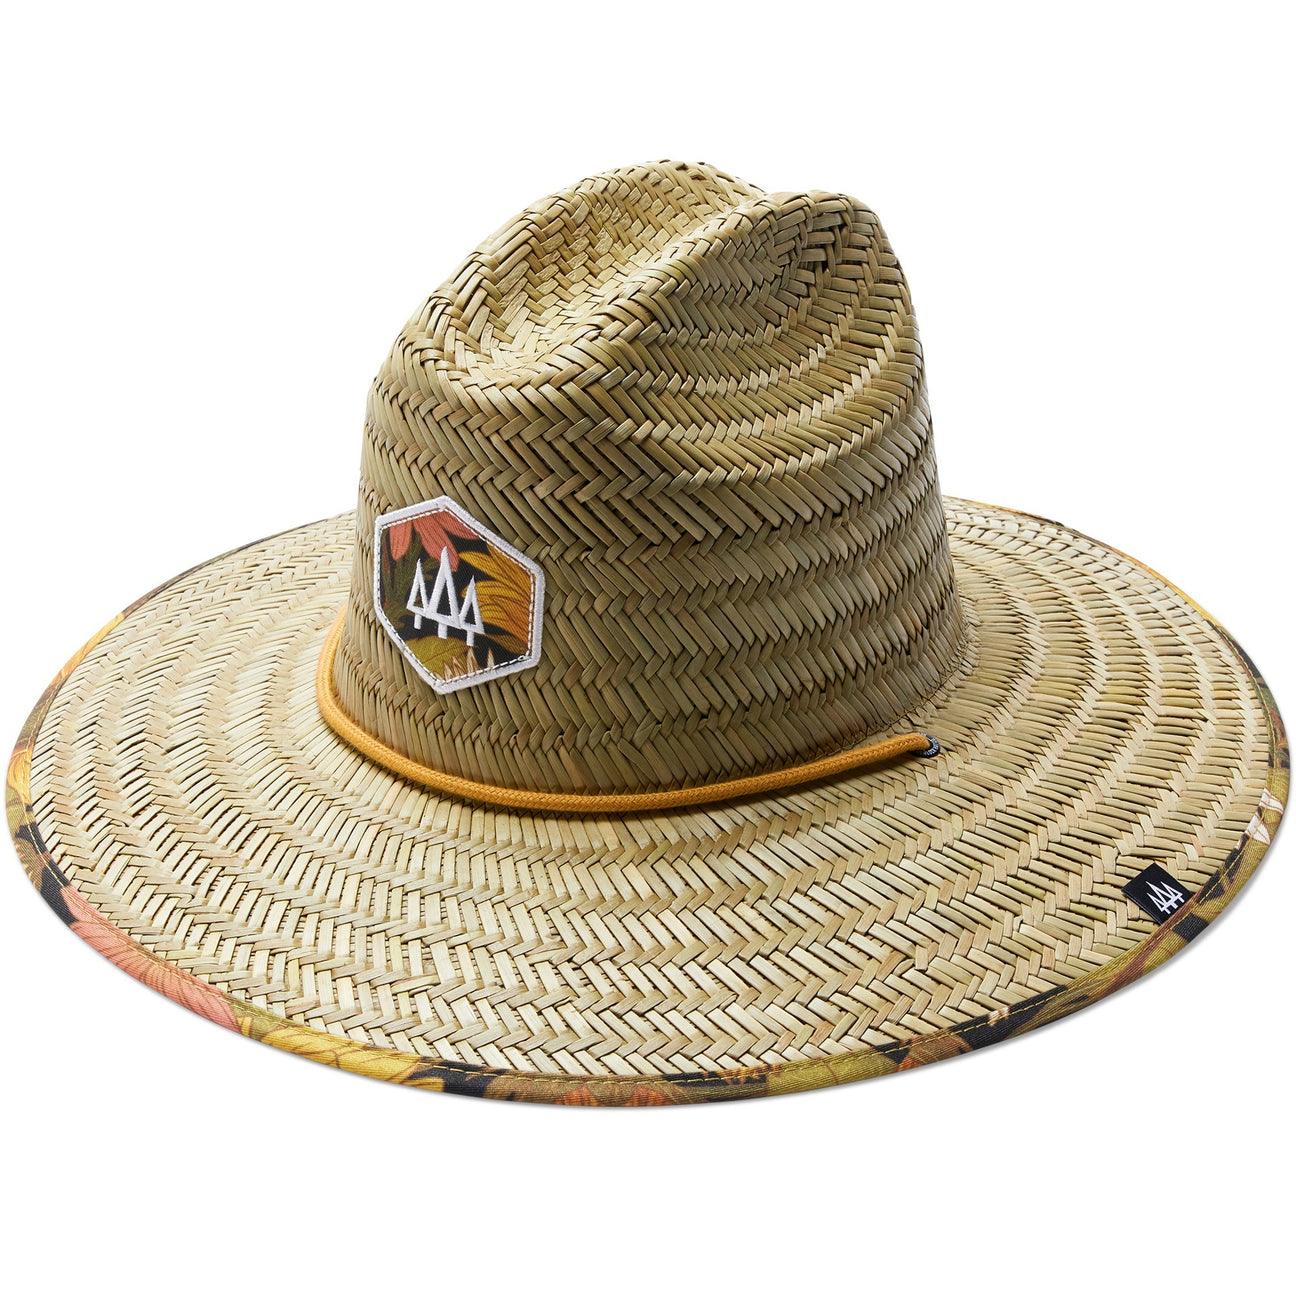 Hemlock Sun Hat  - STORE PICK UP ONLY - The Salty Mare